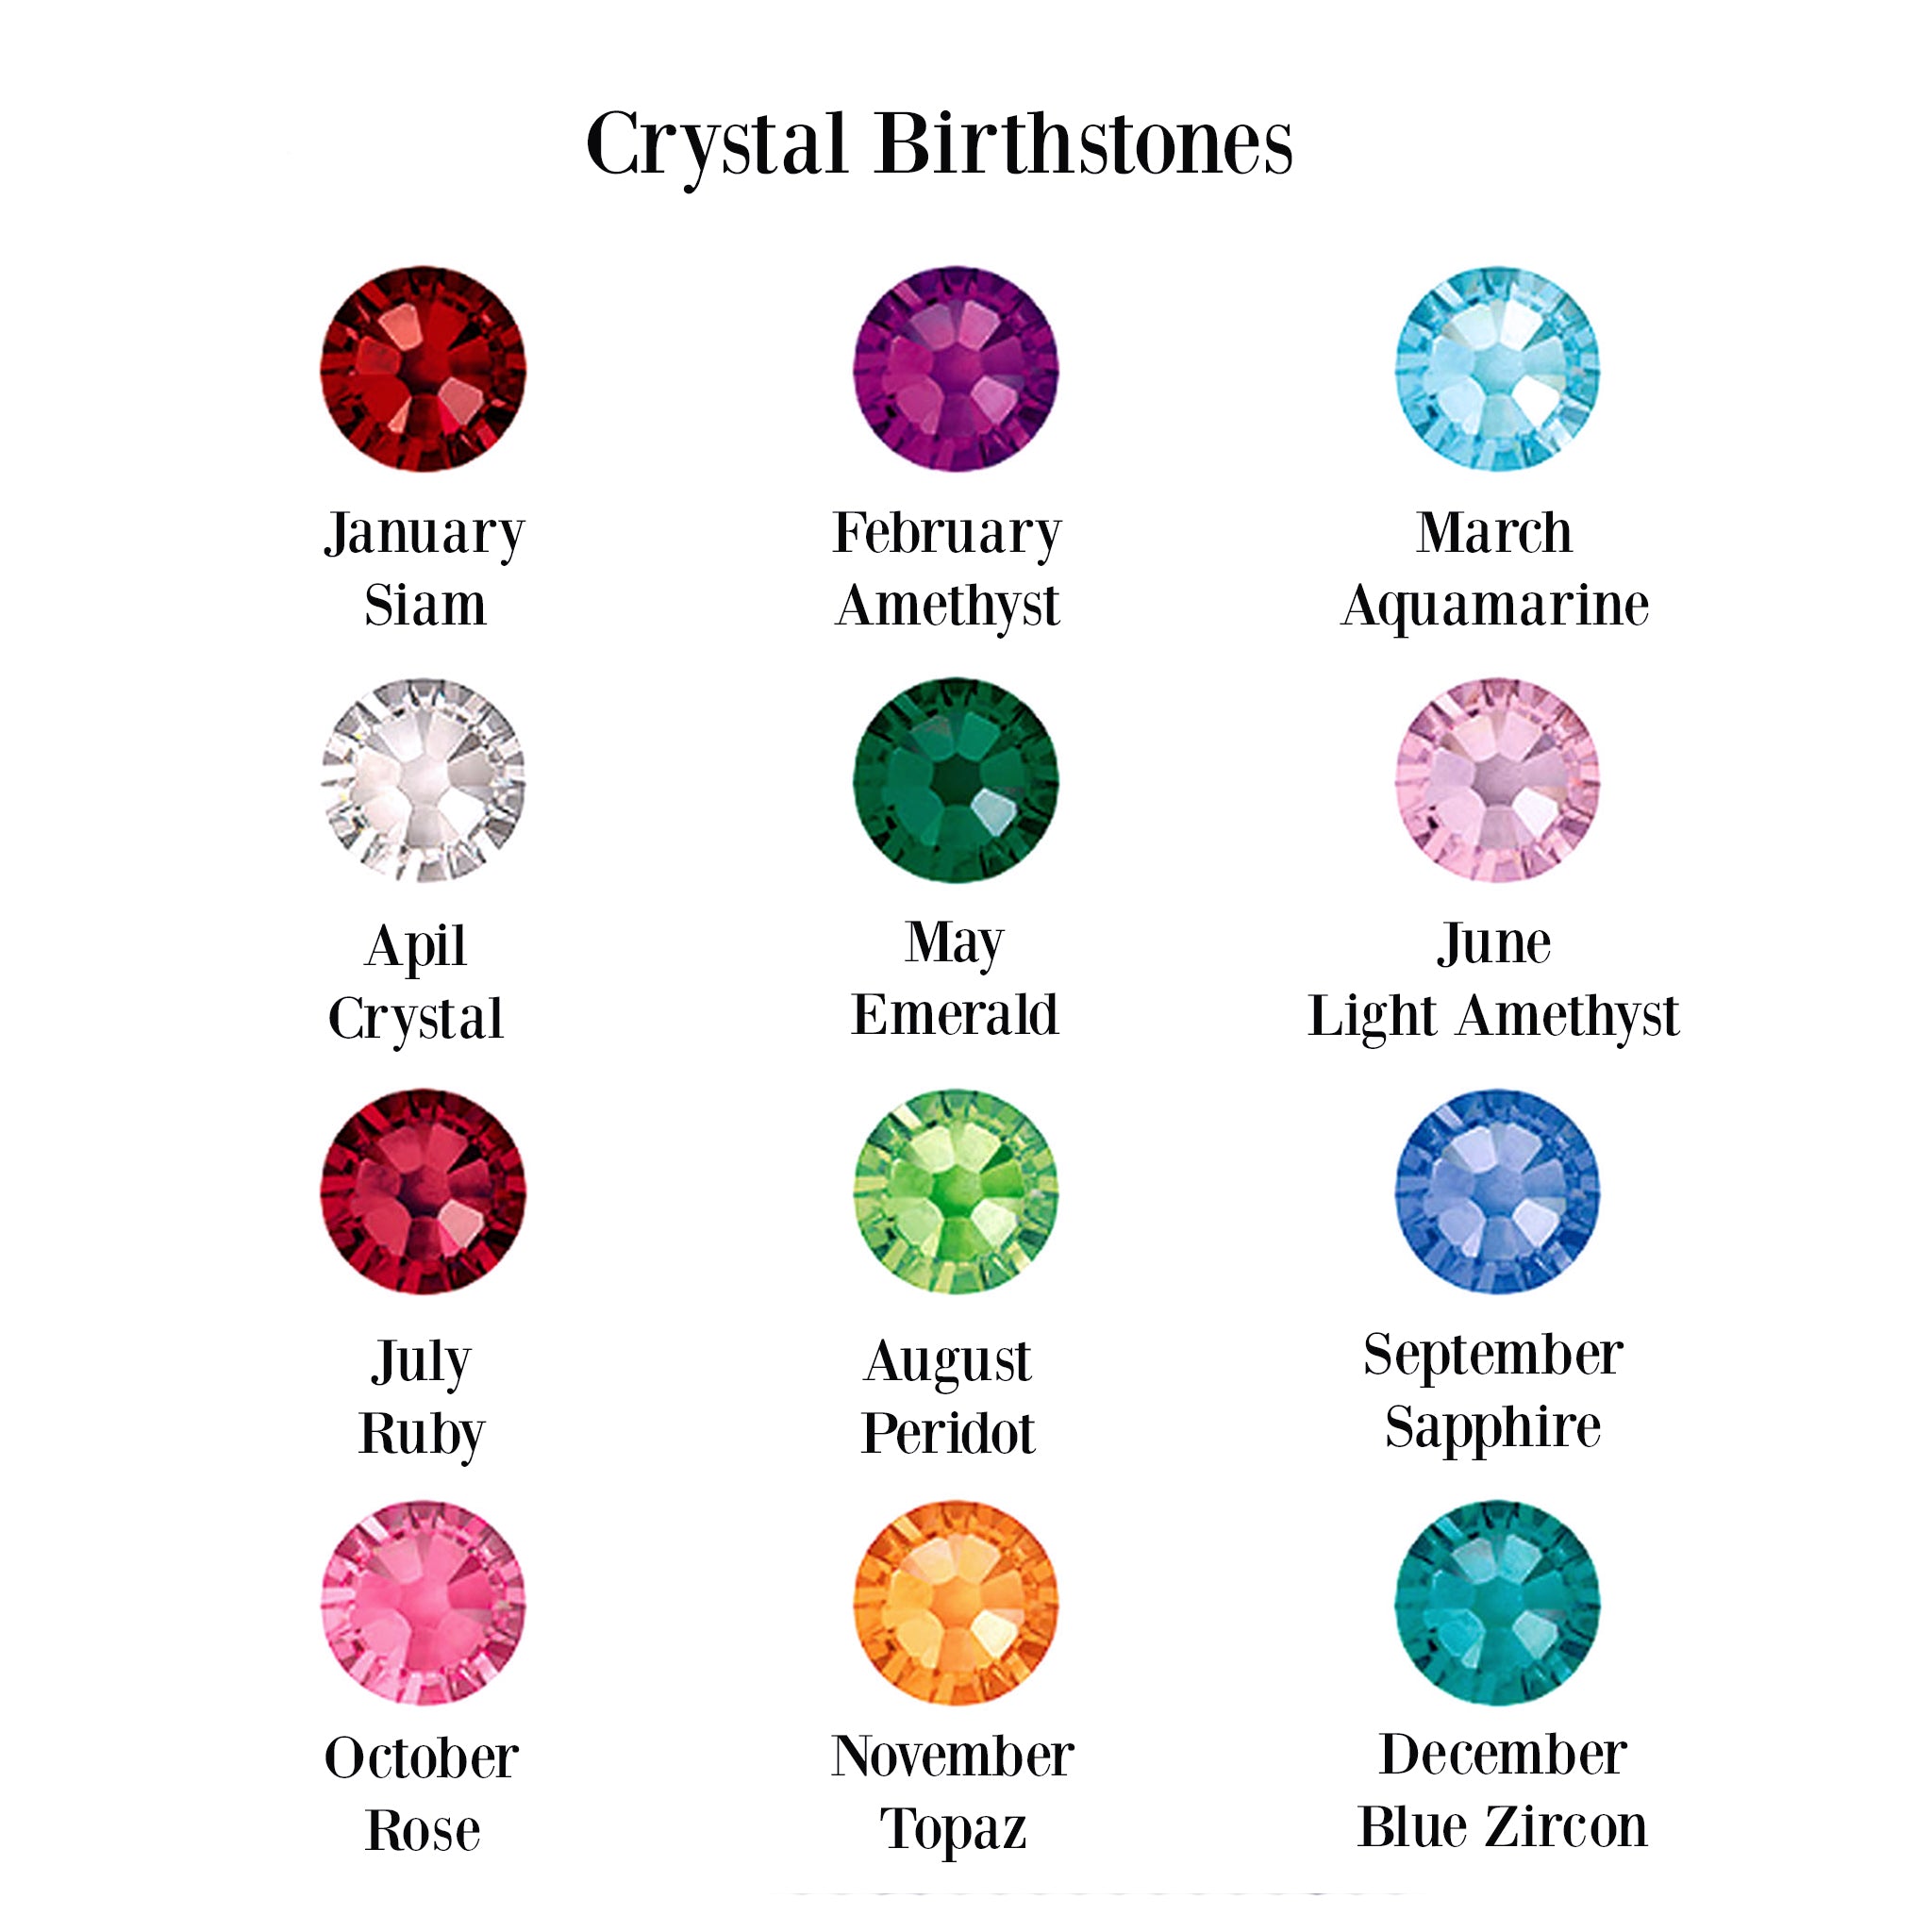 Birthstones available